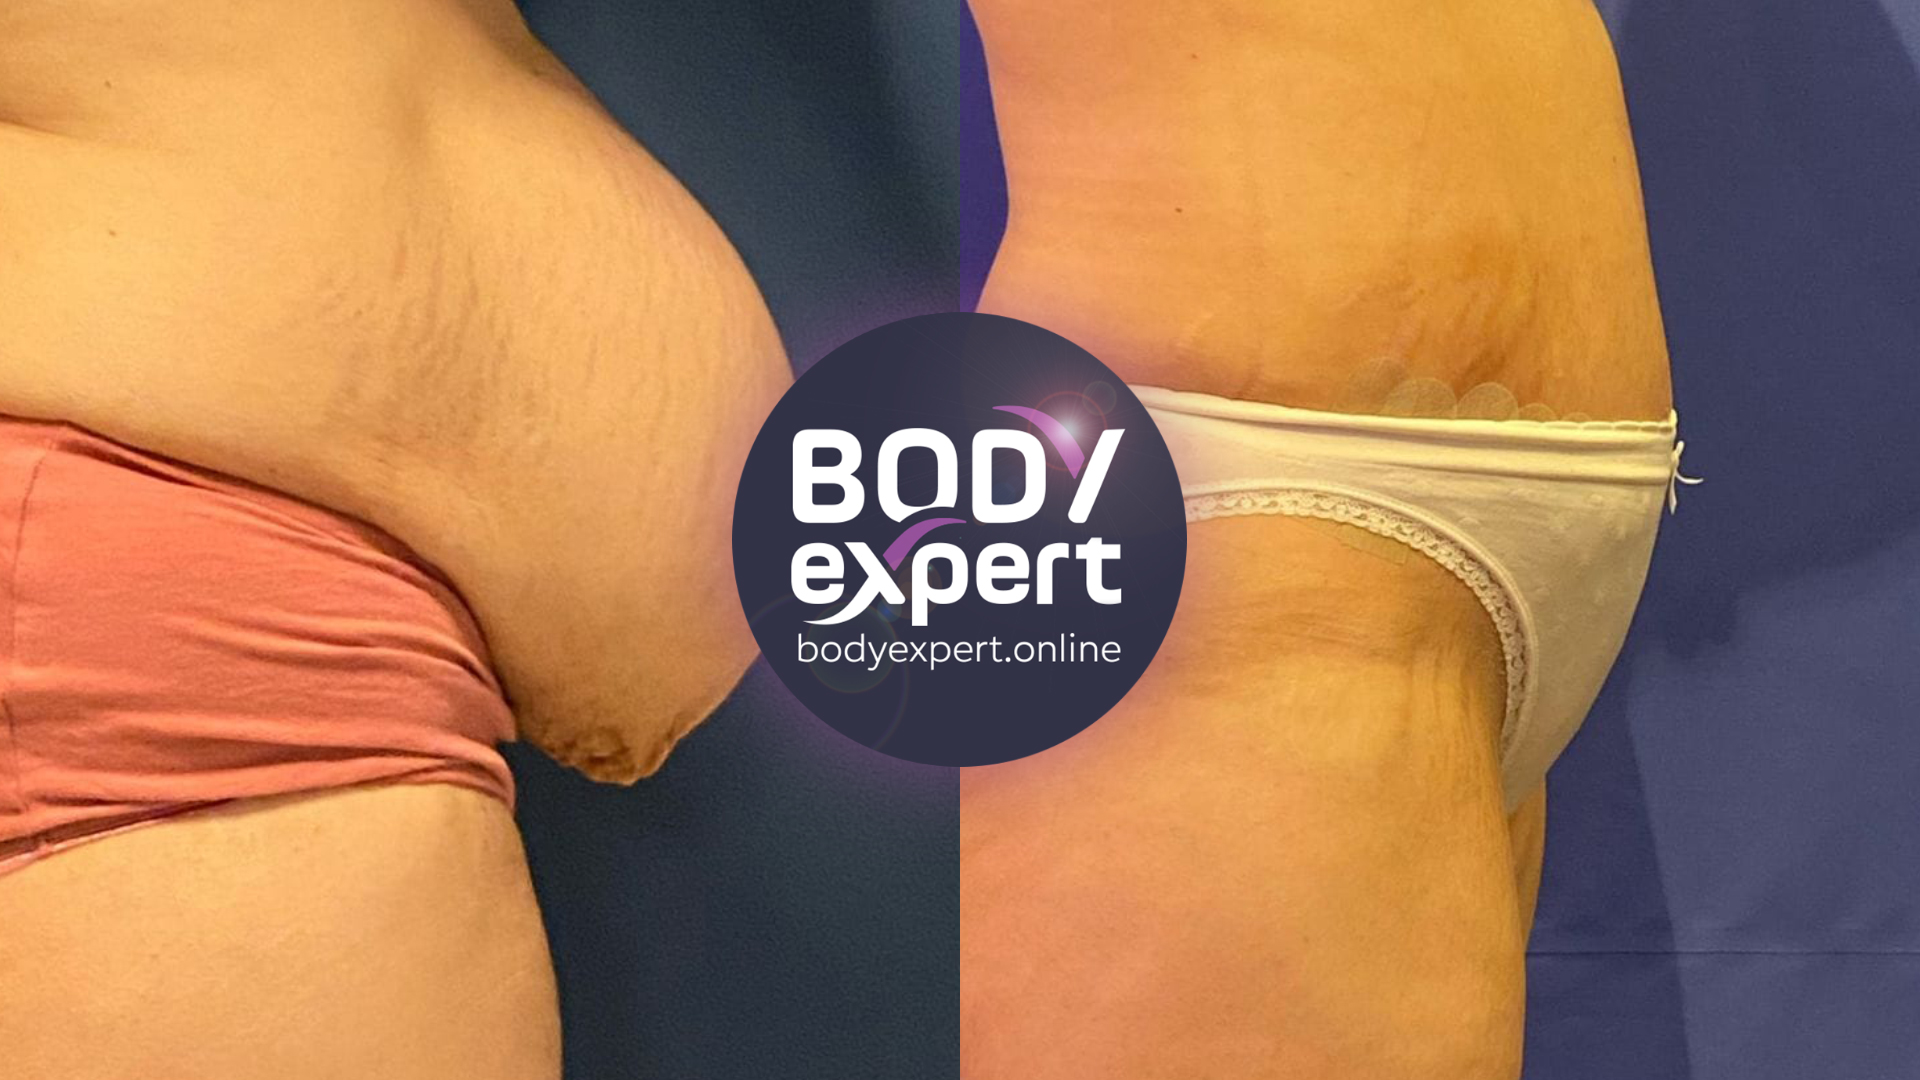 Tummy Tuck after weight loss, before and after